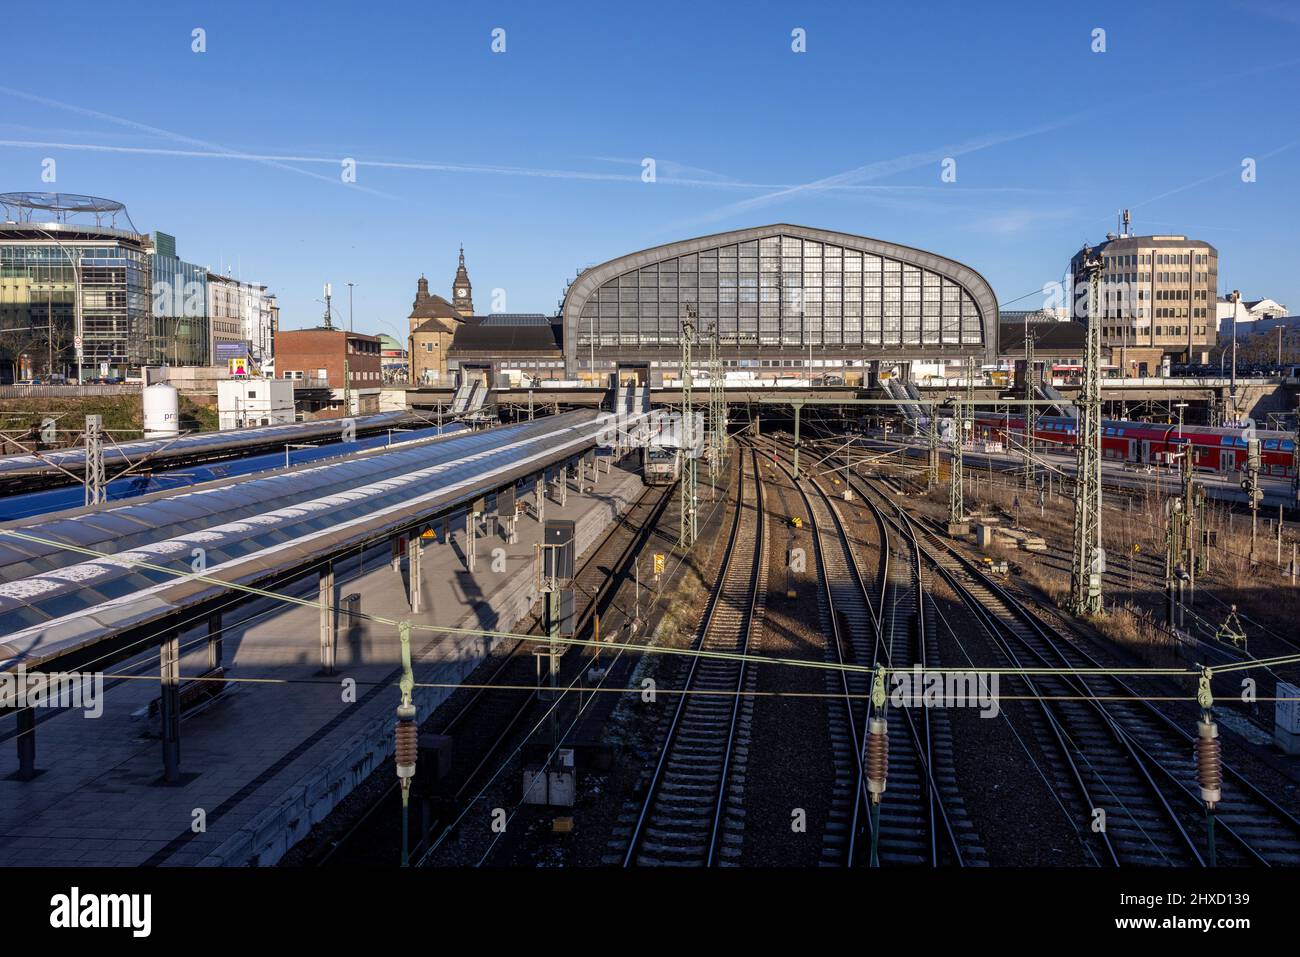 Hanseatic city Hamburg, view of the tracks and the main station with train and suburban train Stock Photo